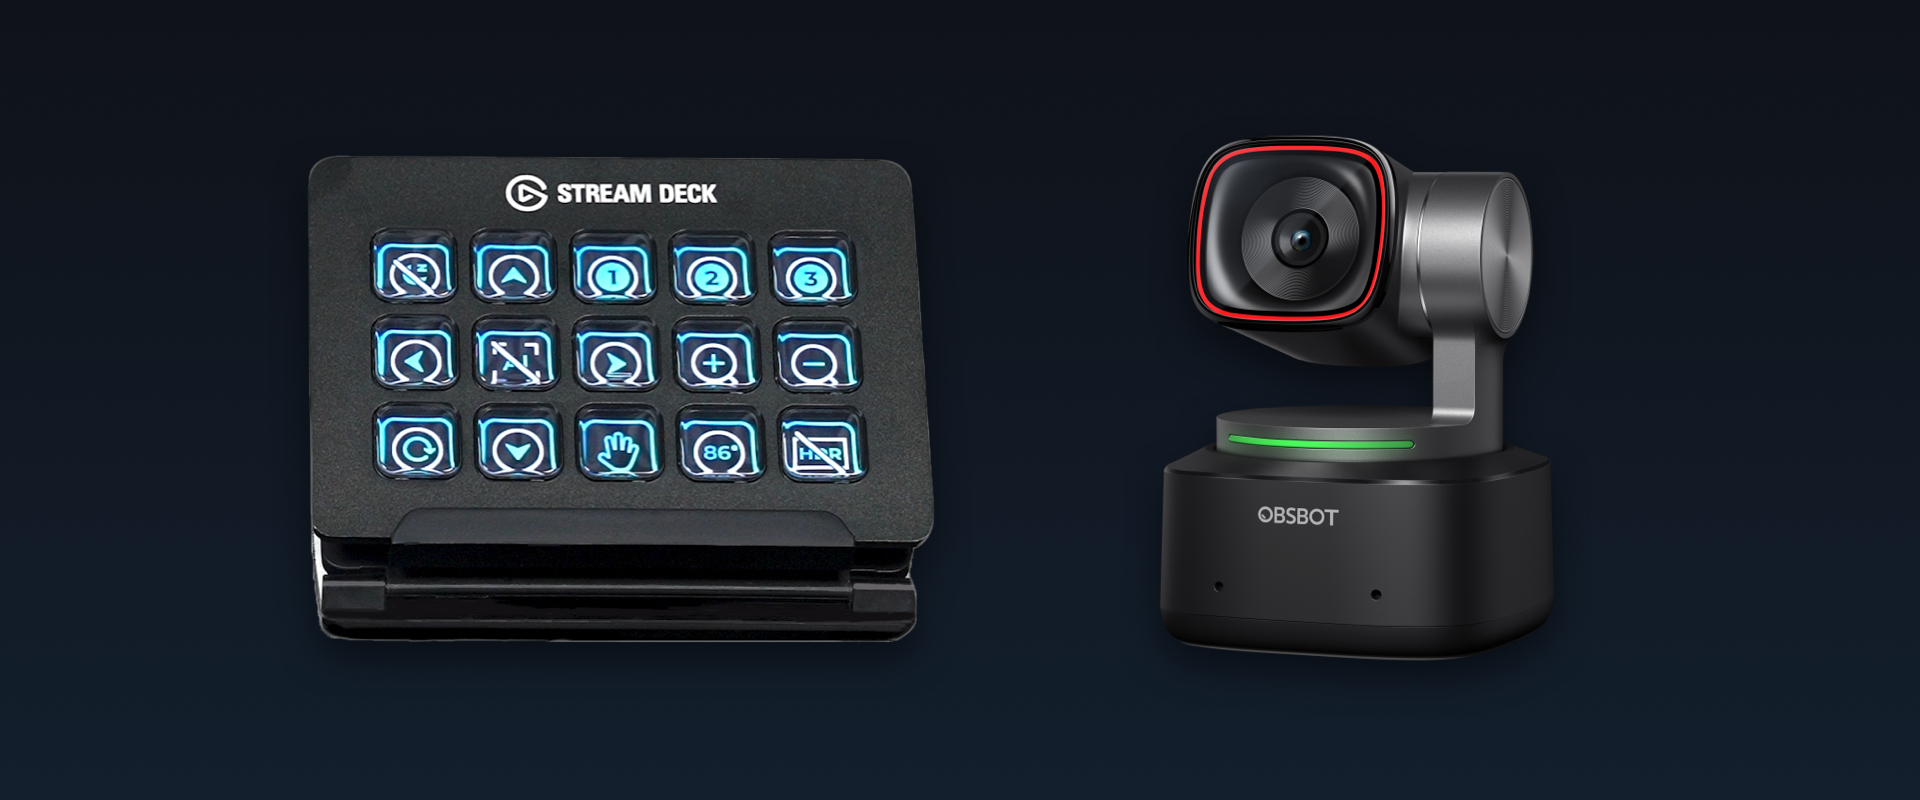 obsbot webcam stream deck plugin updated for tiny 2